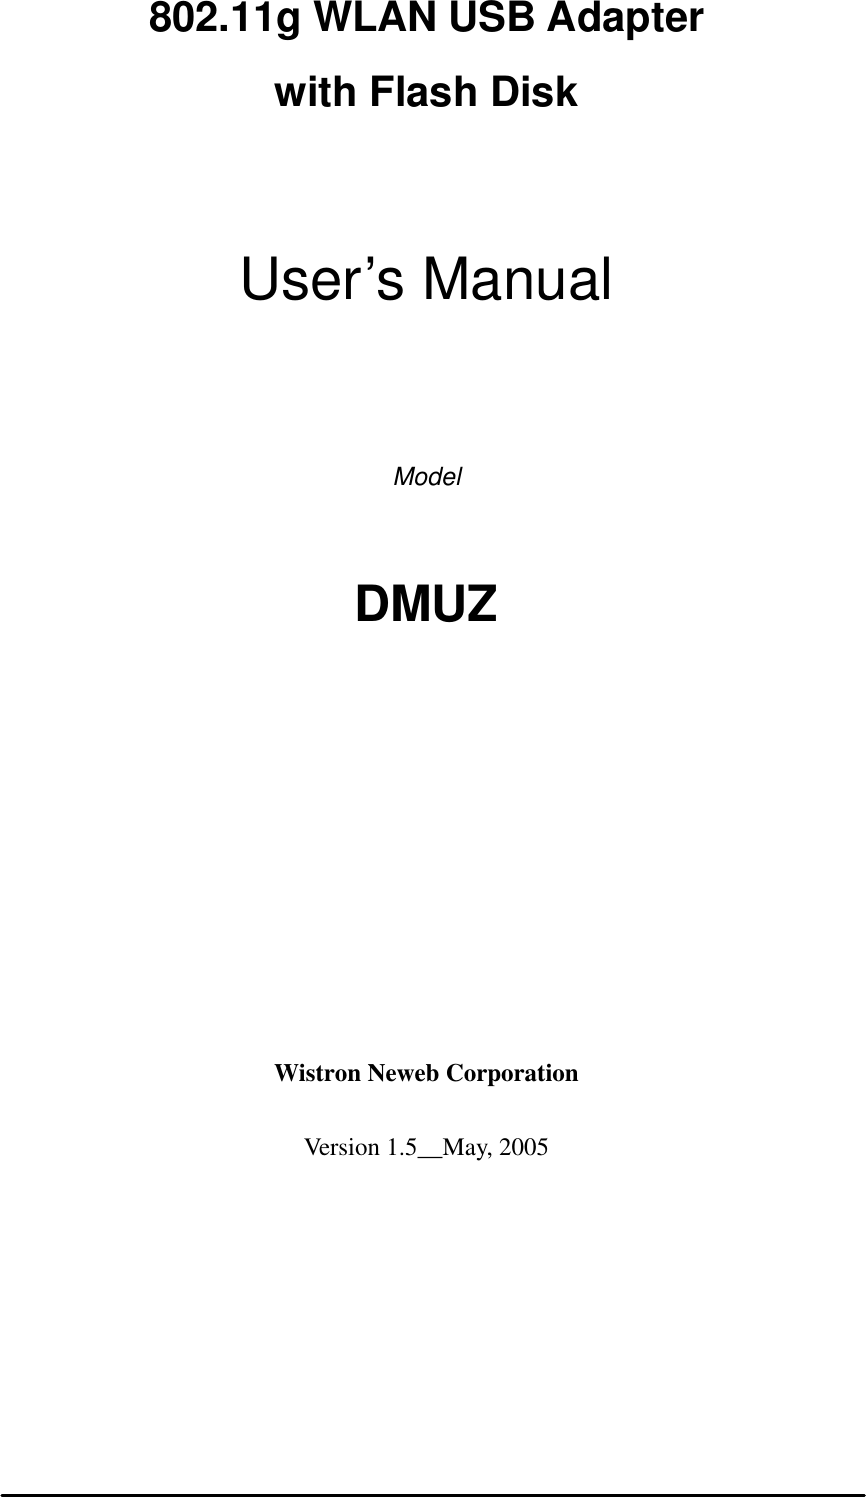  0802.11g WLAN USB Adapter   with Flash Disk   User’s Manual    Model  DMUZ             Wistron Neweb Corporation  Version 1.5__May, 2005 